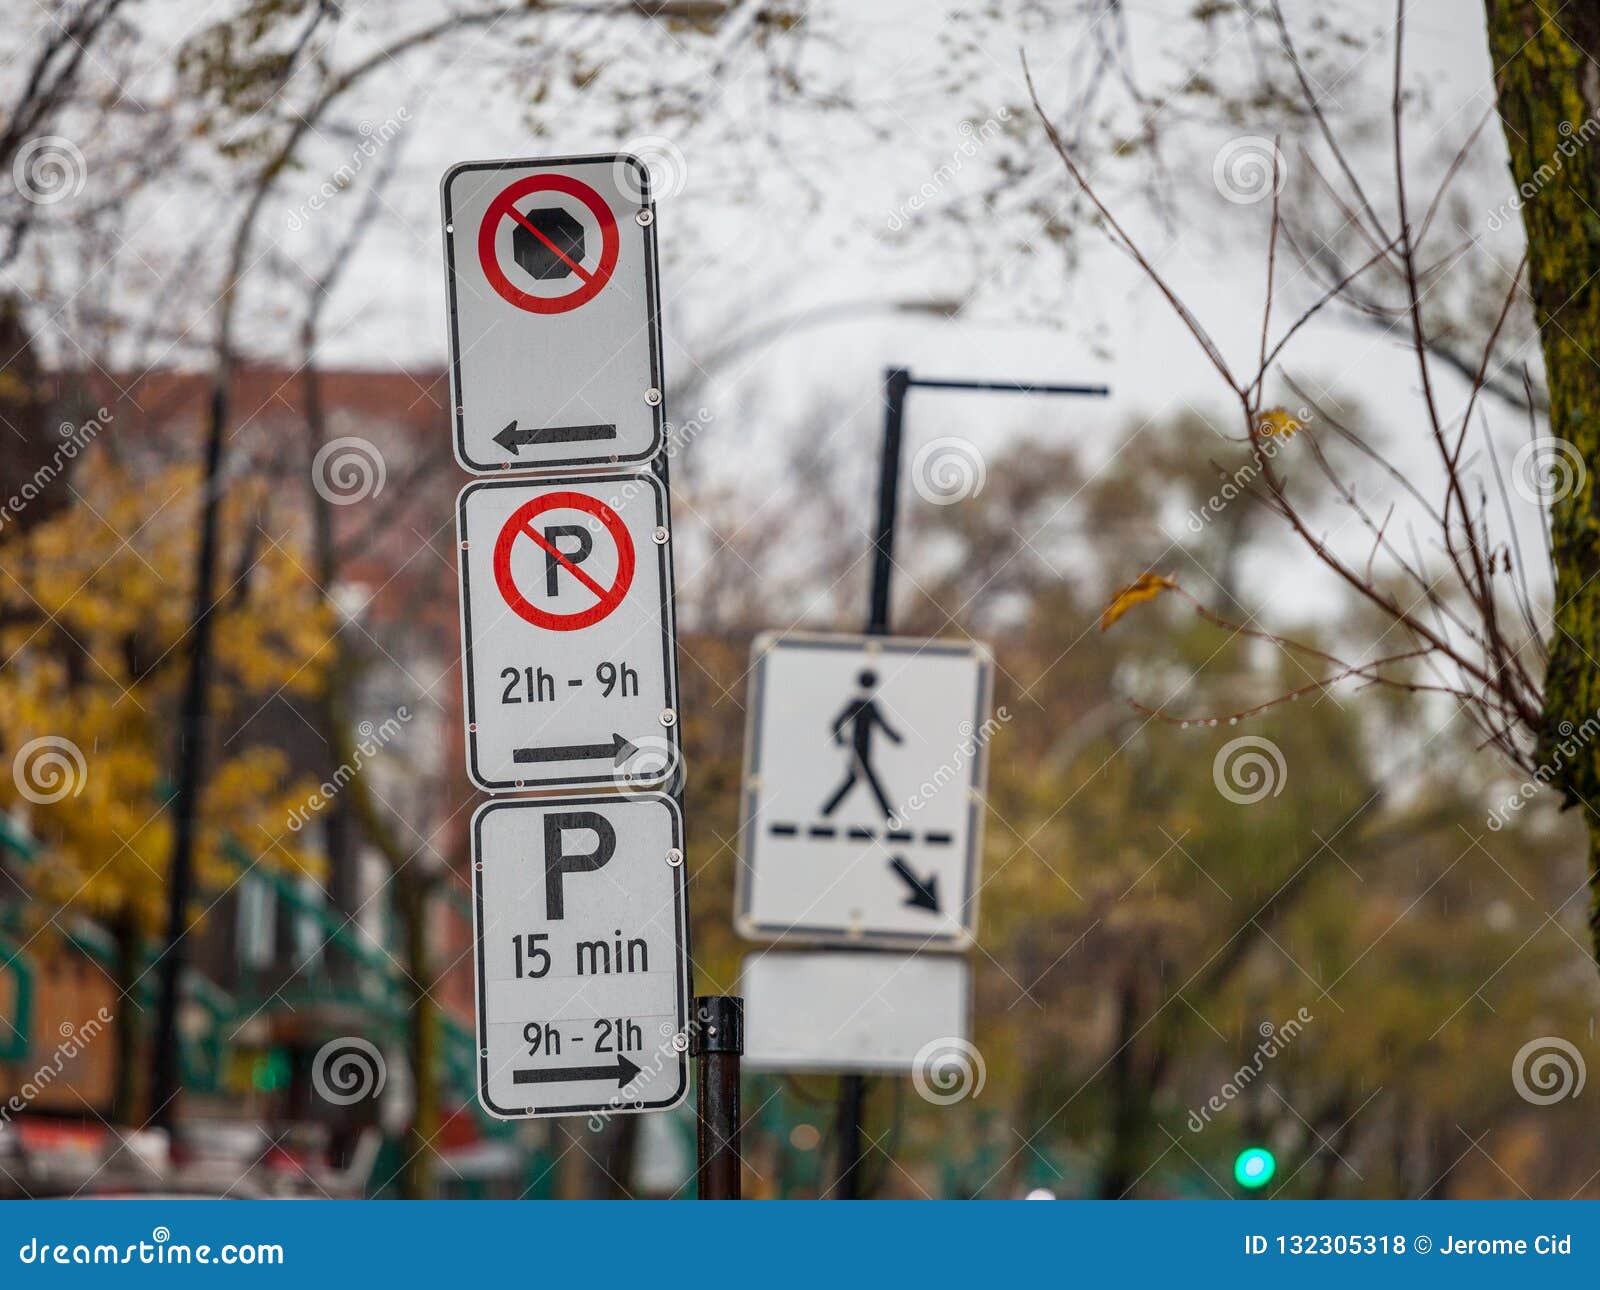 typical north american paking and no parking signs with detailed instructions on the parking regulations taken in montreal, quebec